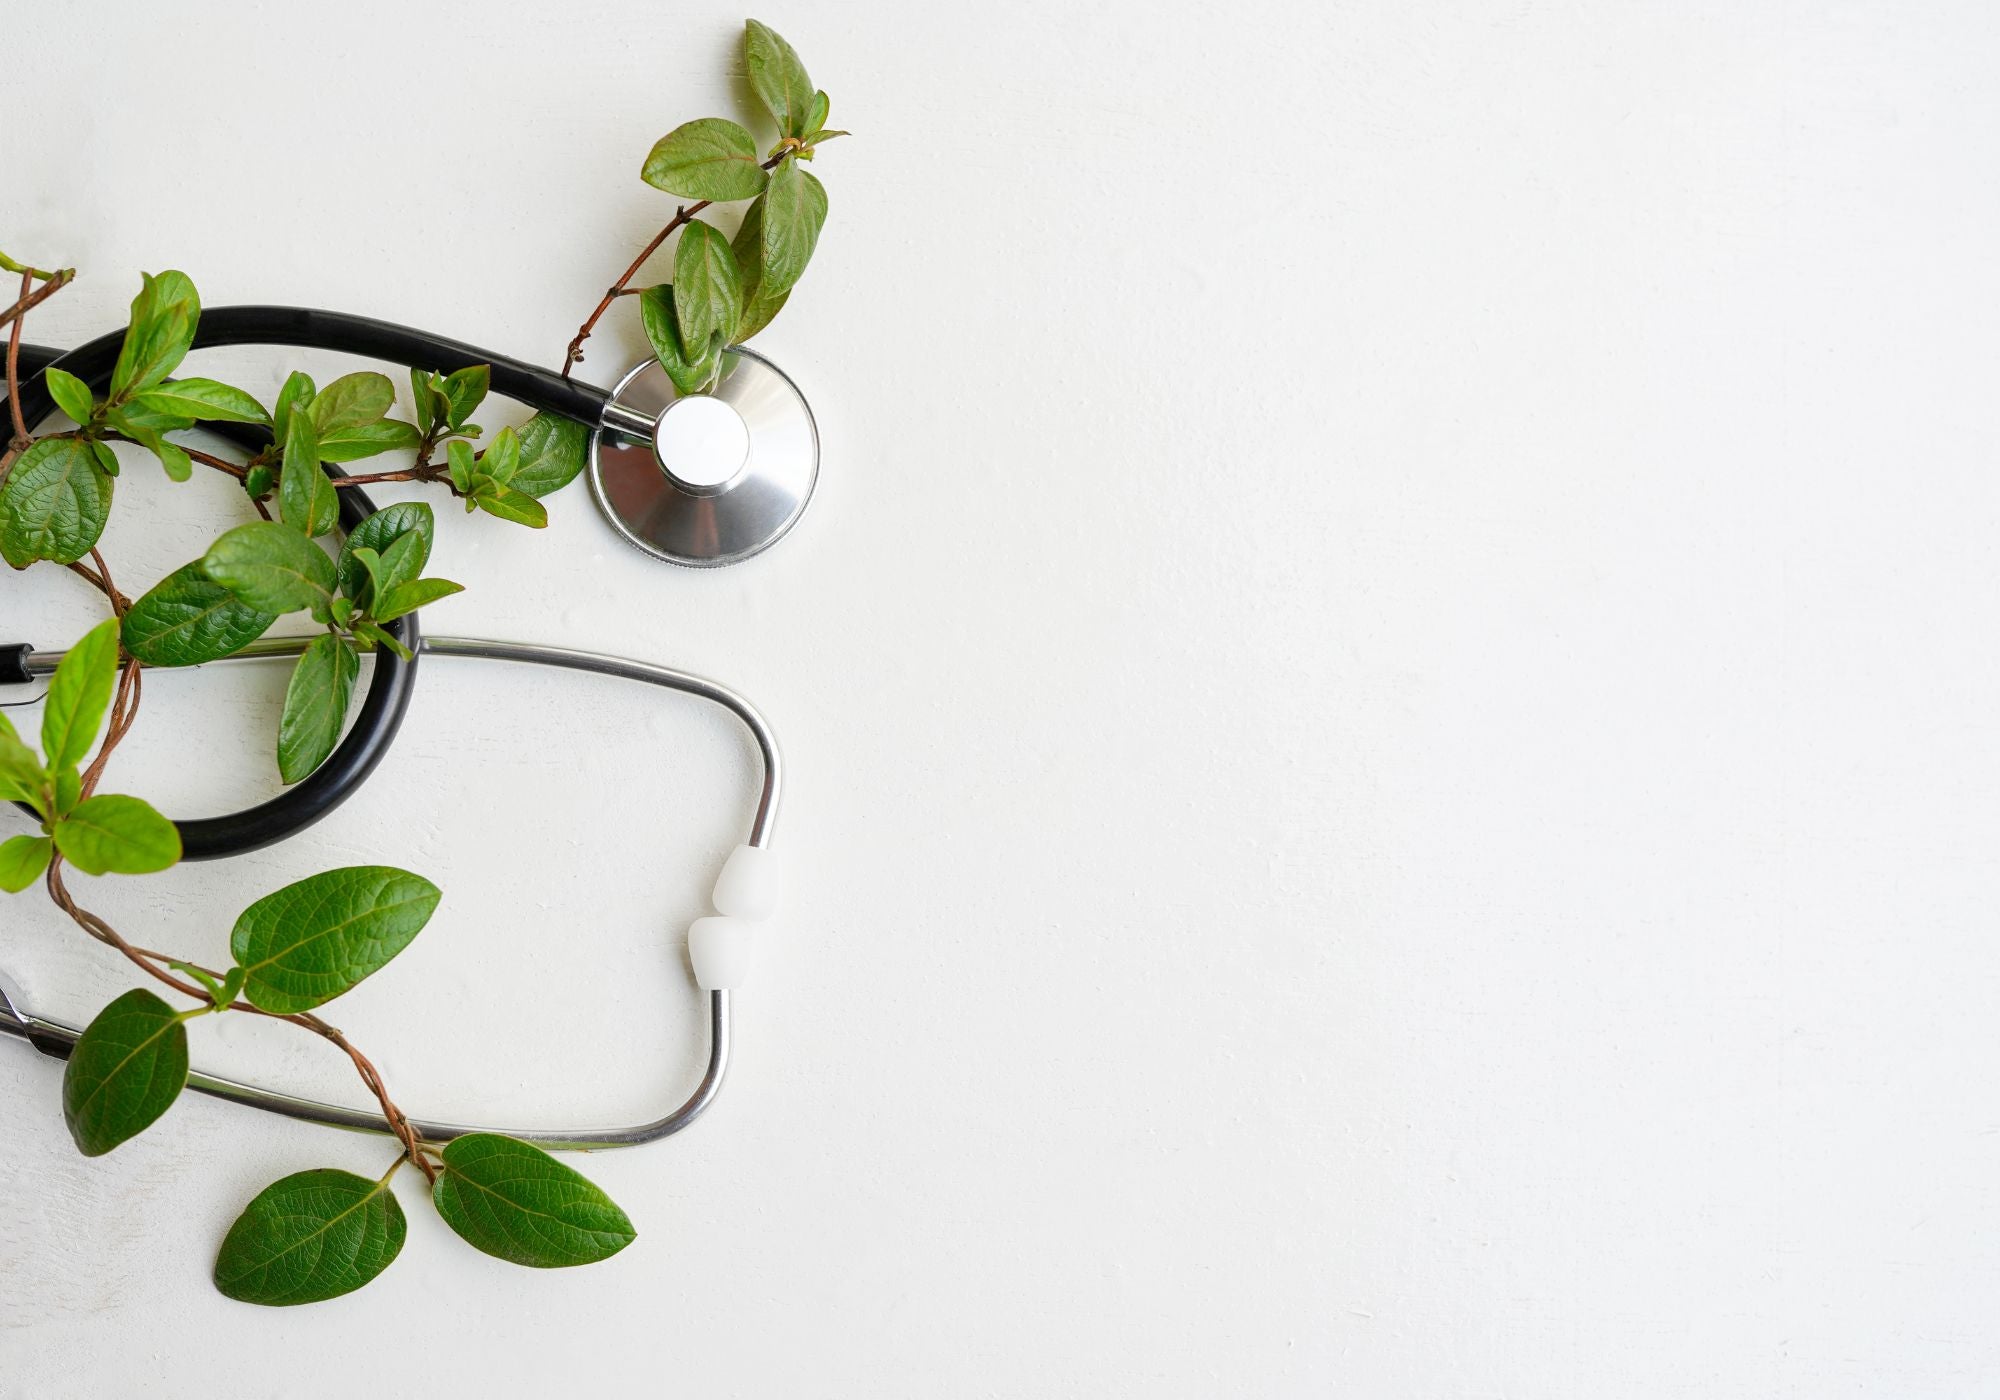 Stethoscope and plants